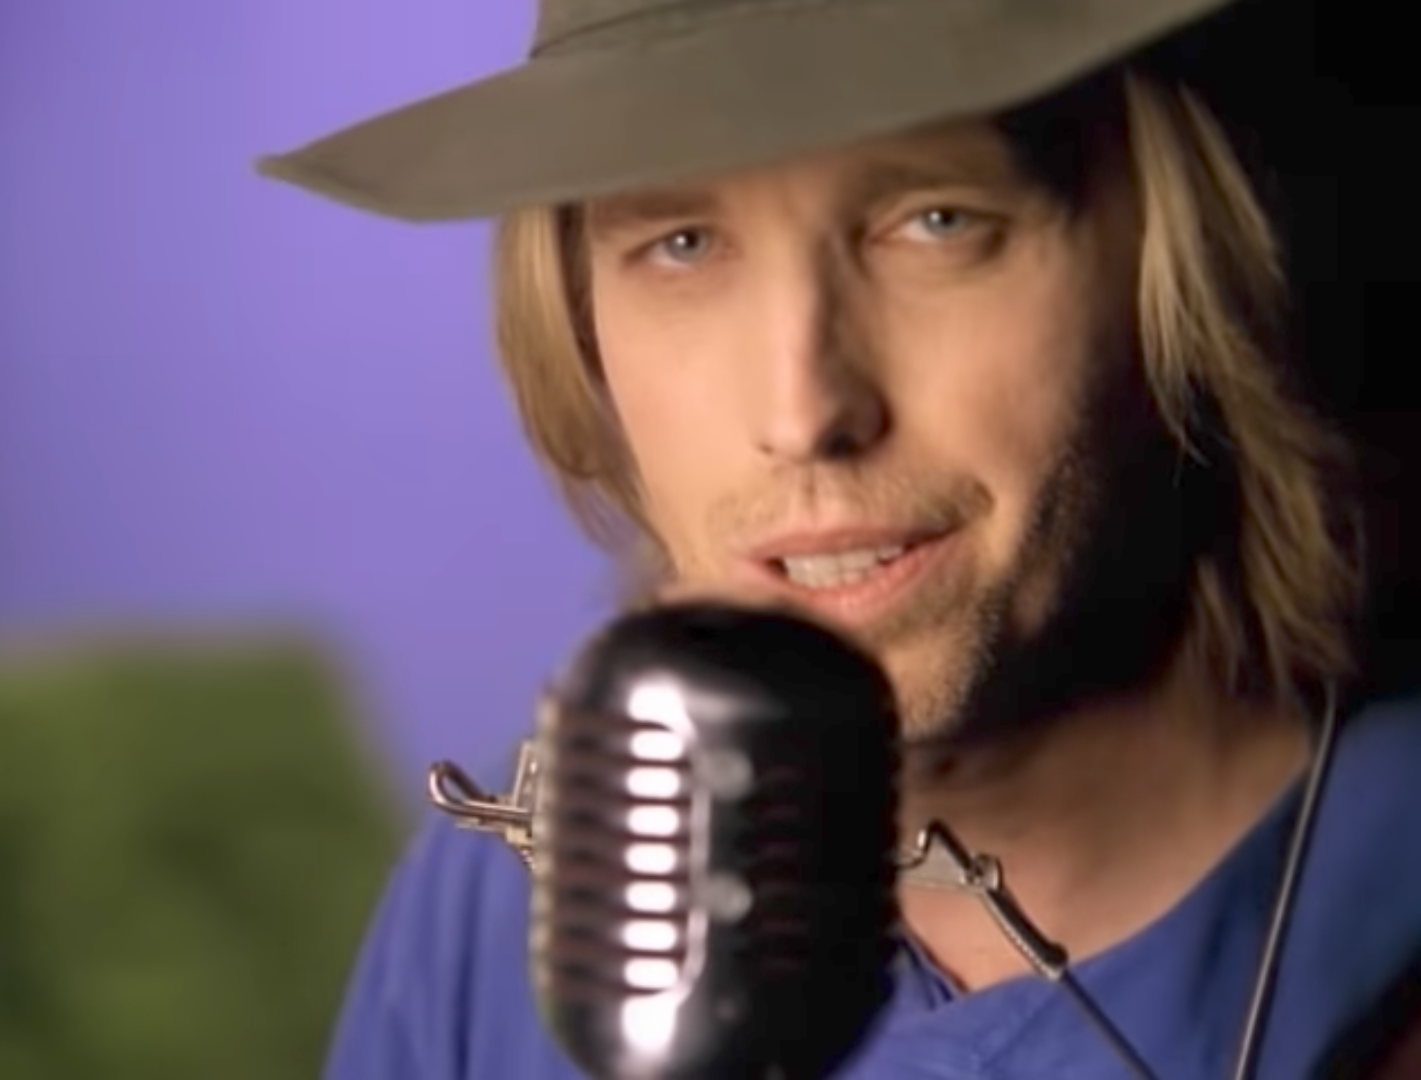 Tom Petty still shot from 'You Don't Know How It Feels' video. Photo by: Tom Petty / YouTube